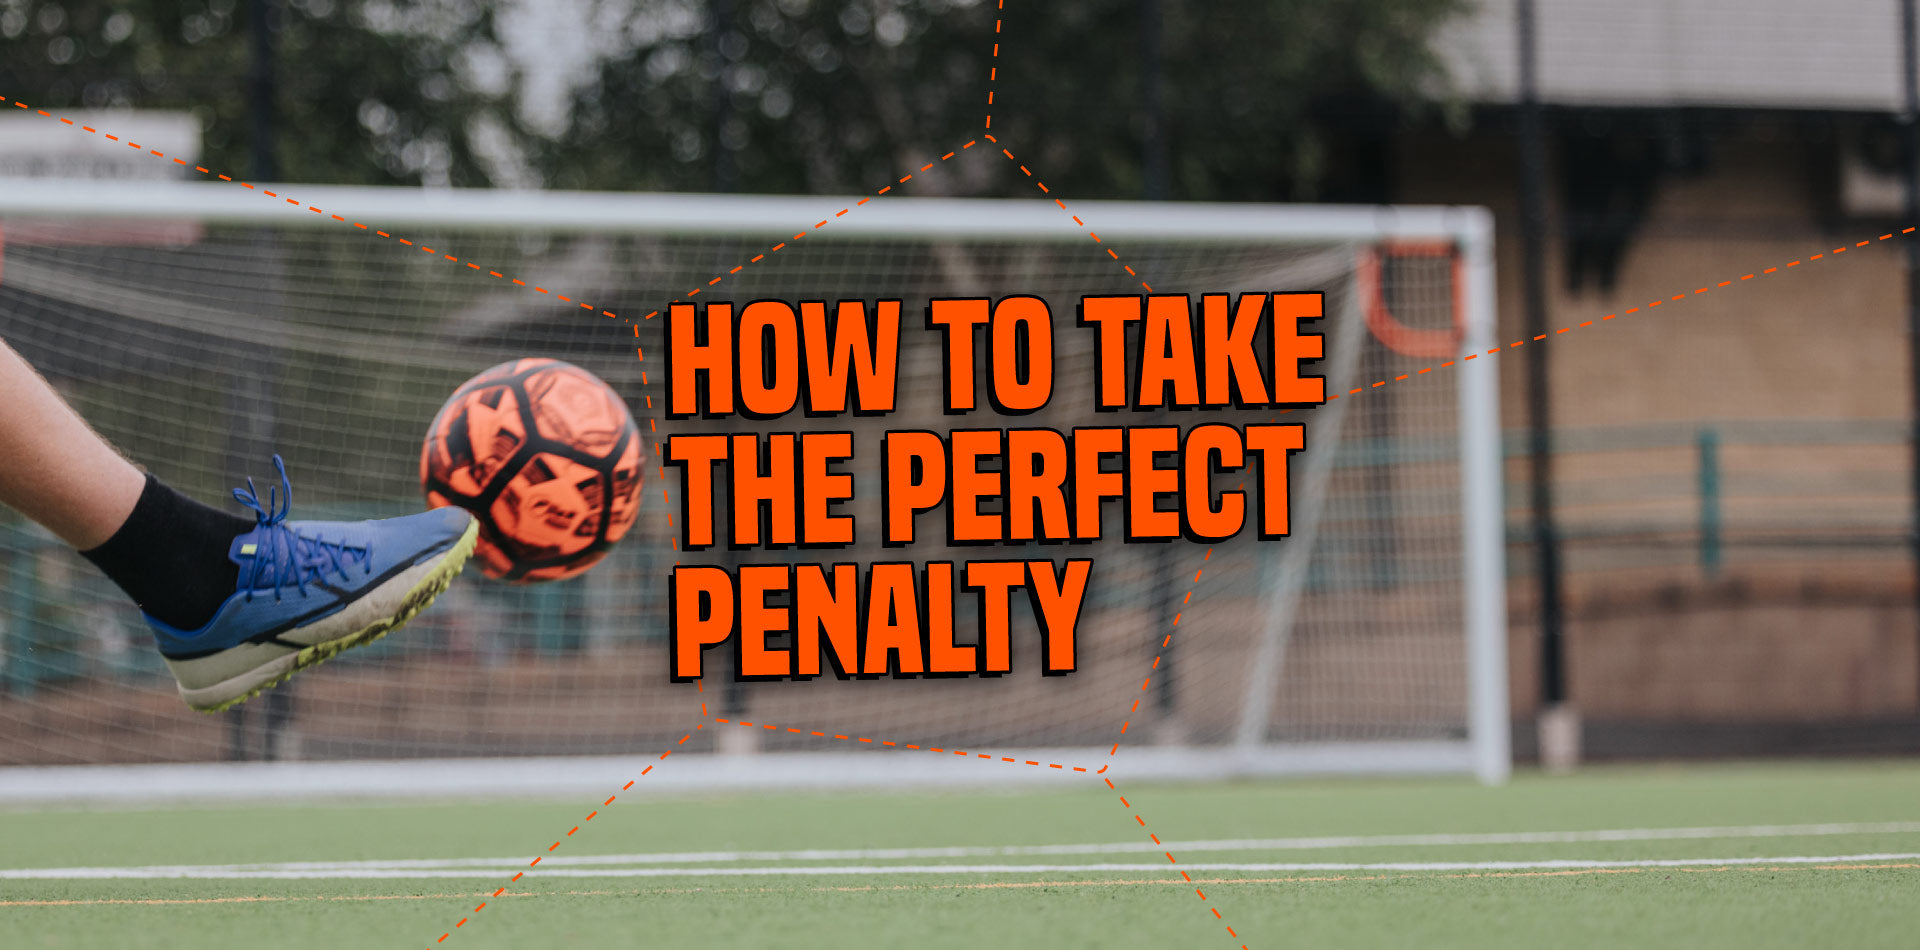 How to take the perfect penalty!